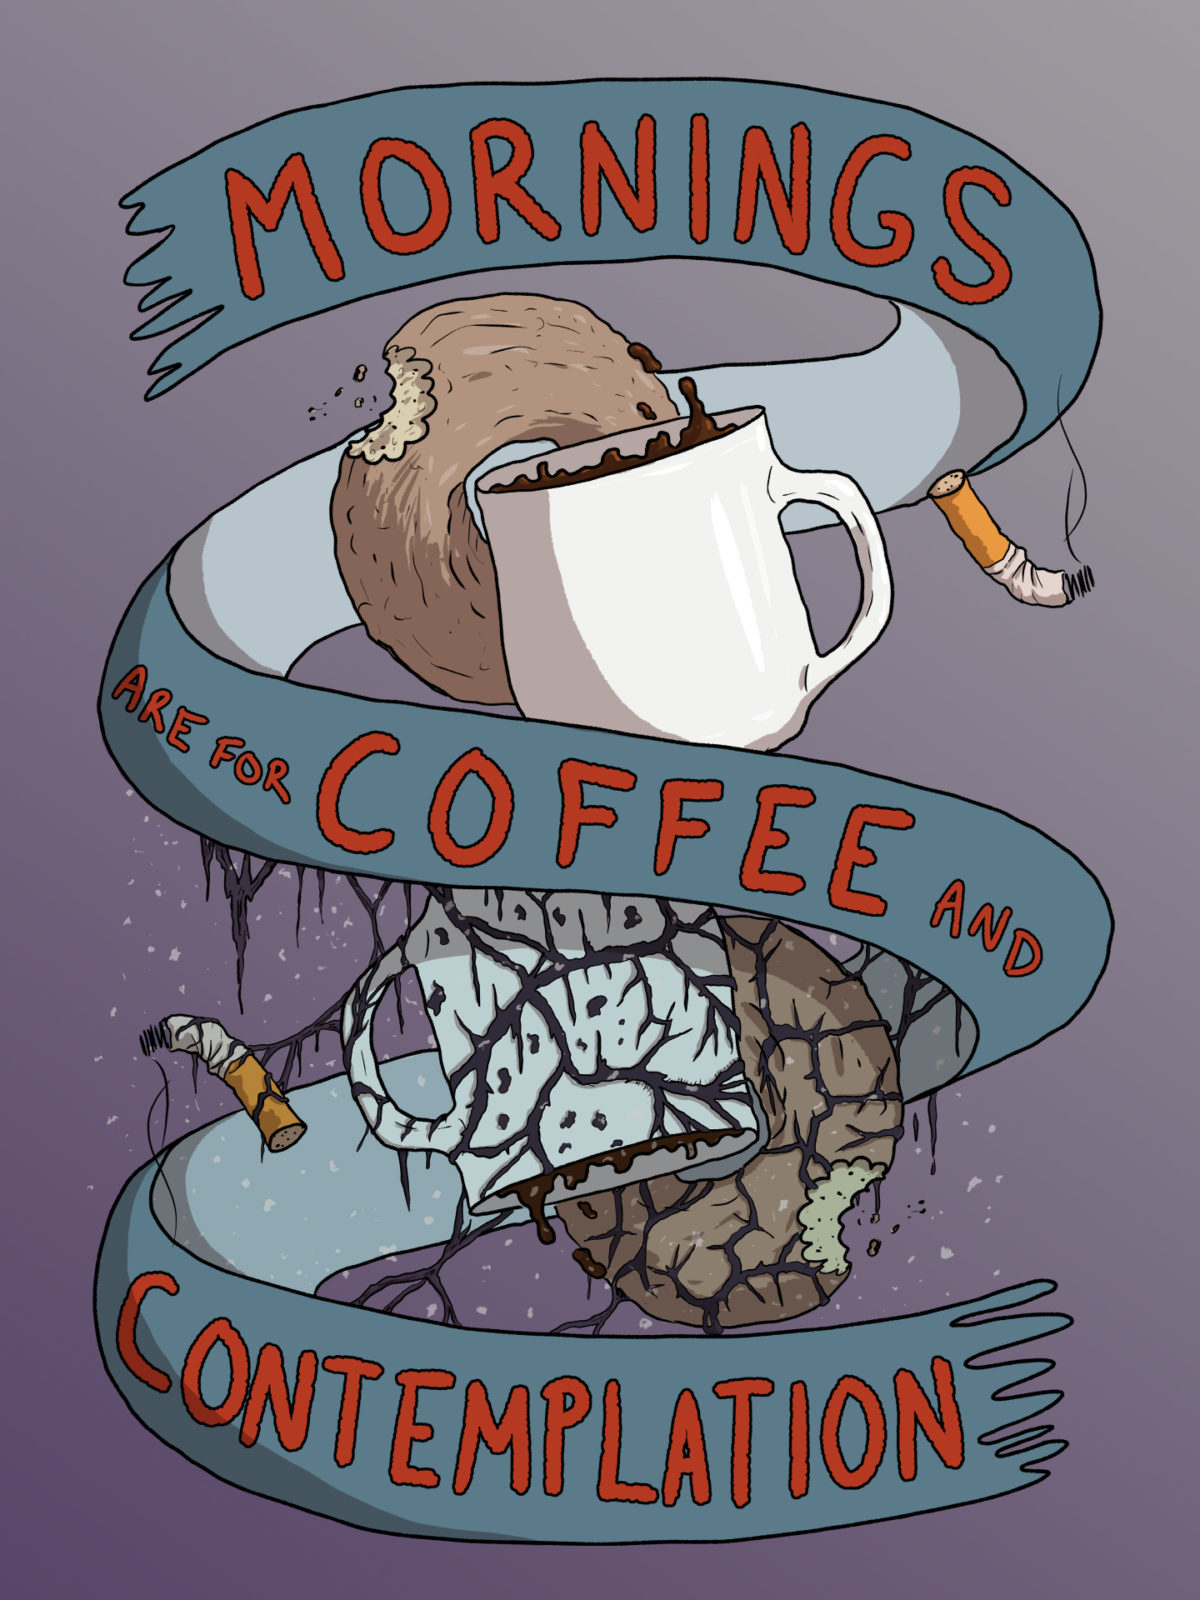 Fan Art of Stranger Things with the text "Mornings are for Coffee and Contemplation"